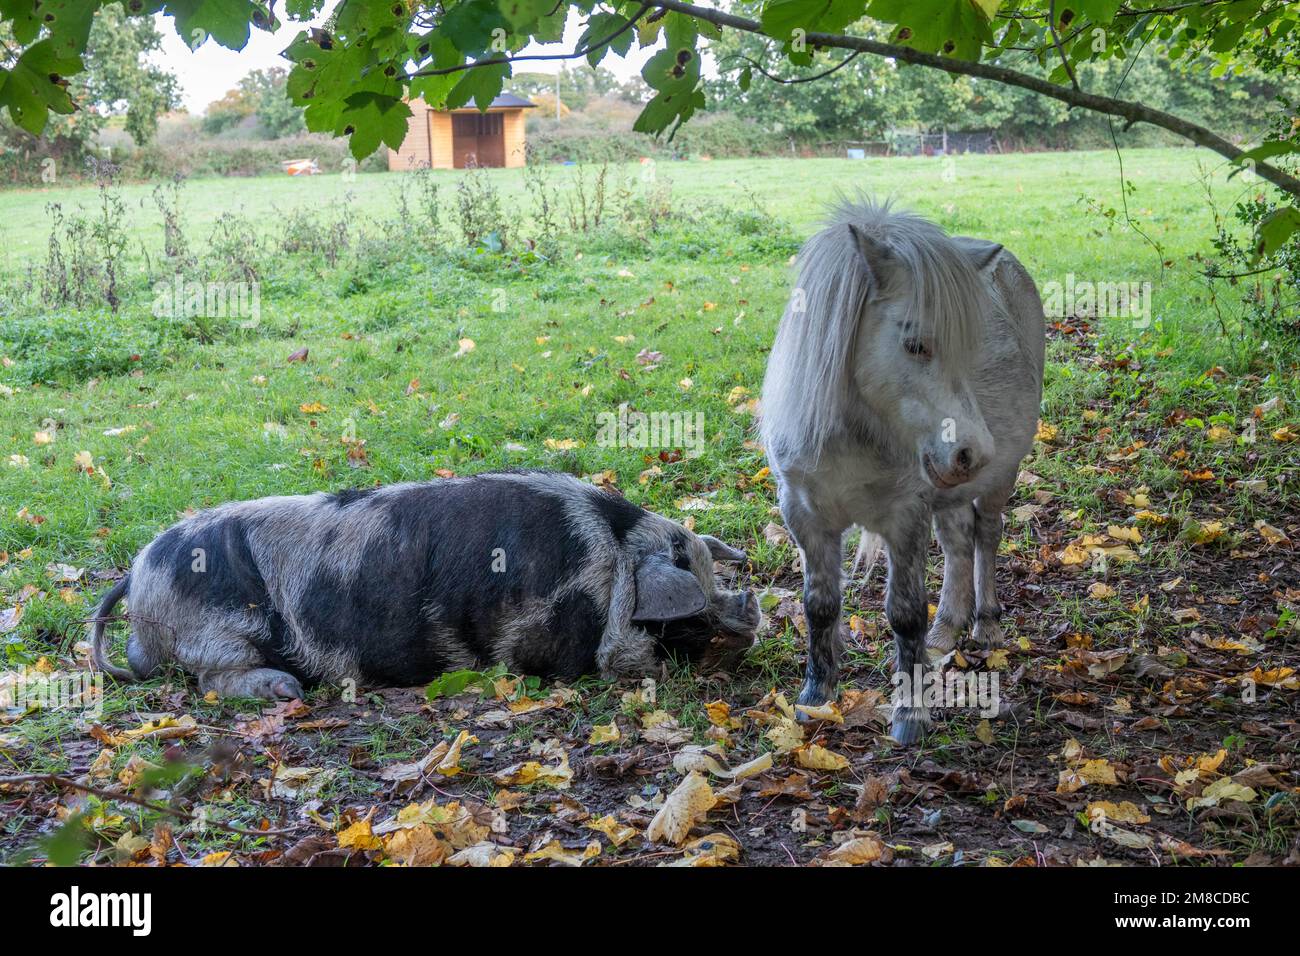 large pig with black spots lying next to a small white pony Stock Photo